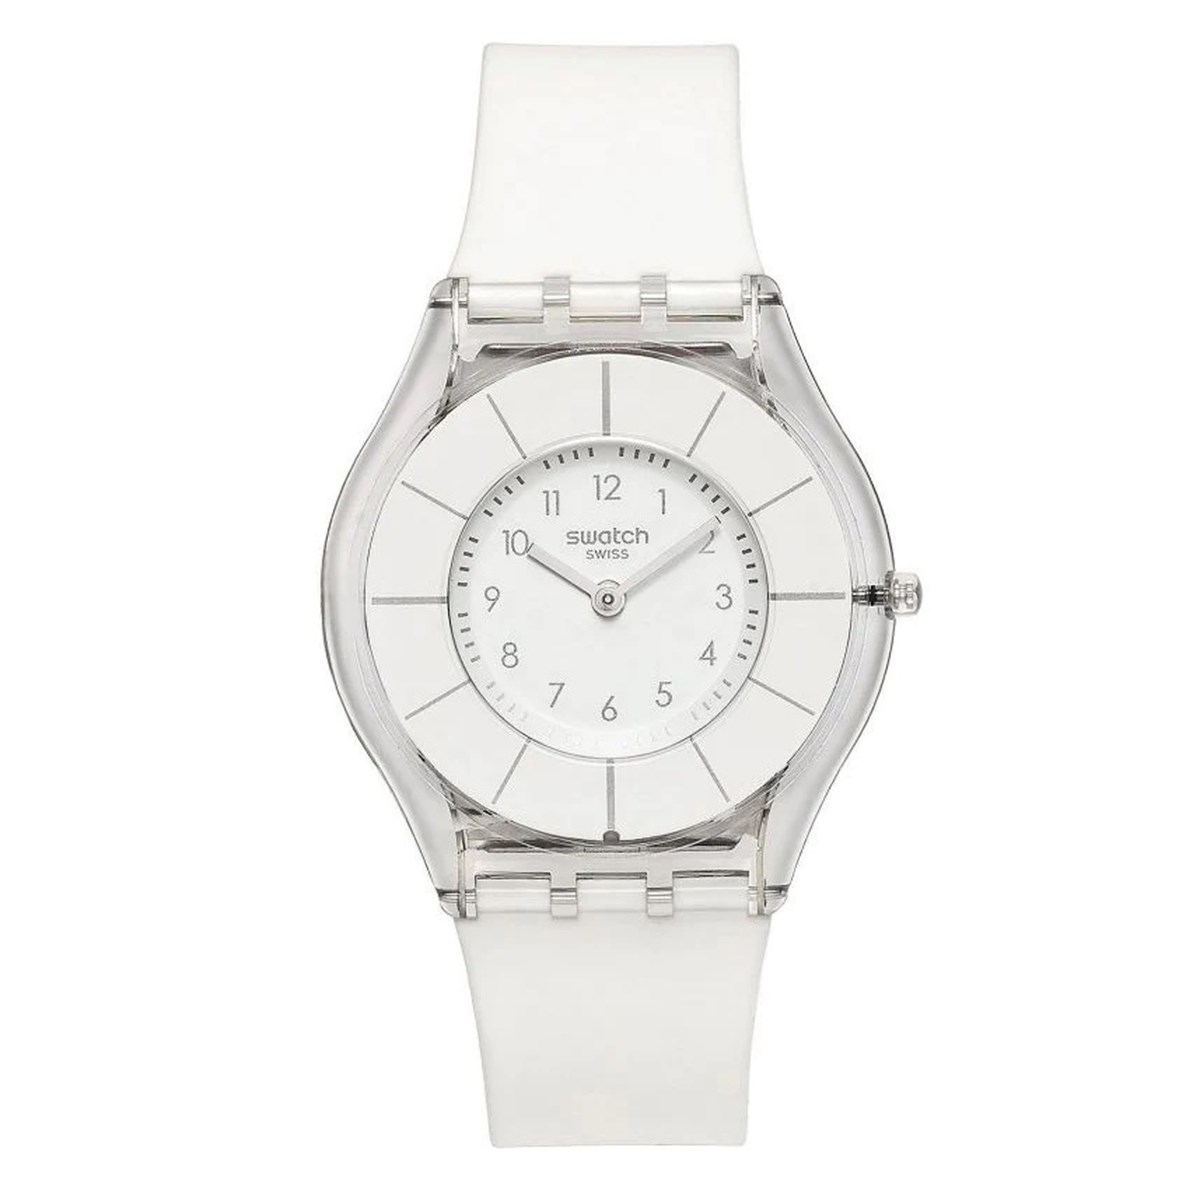 Montre femme Swatch Skin White Classiness - vue 3